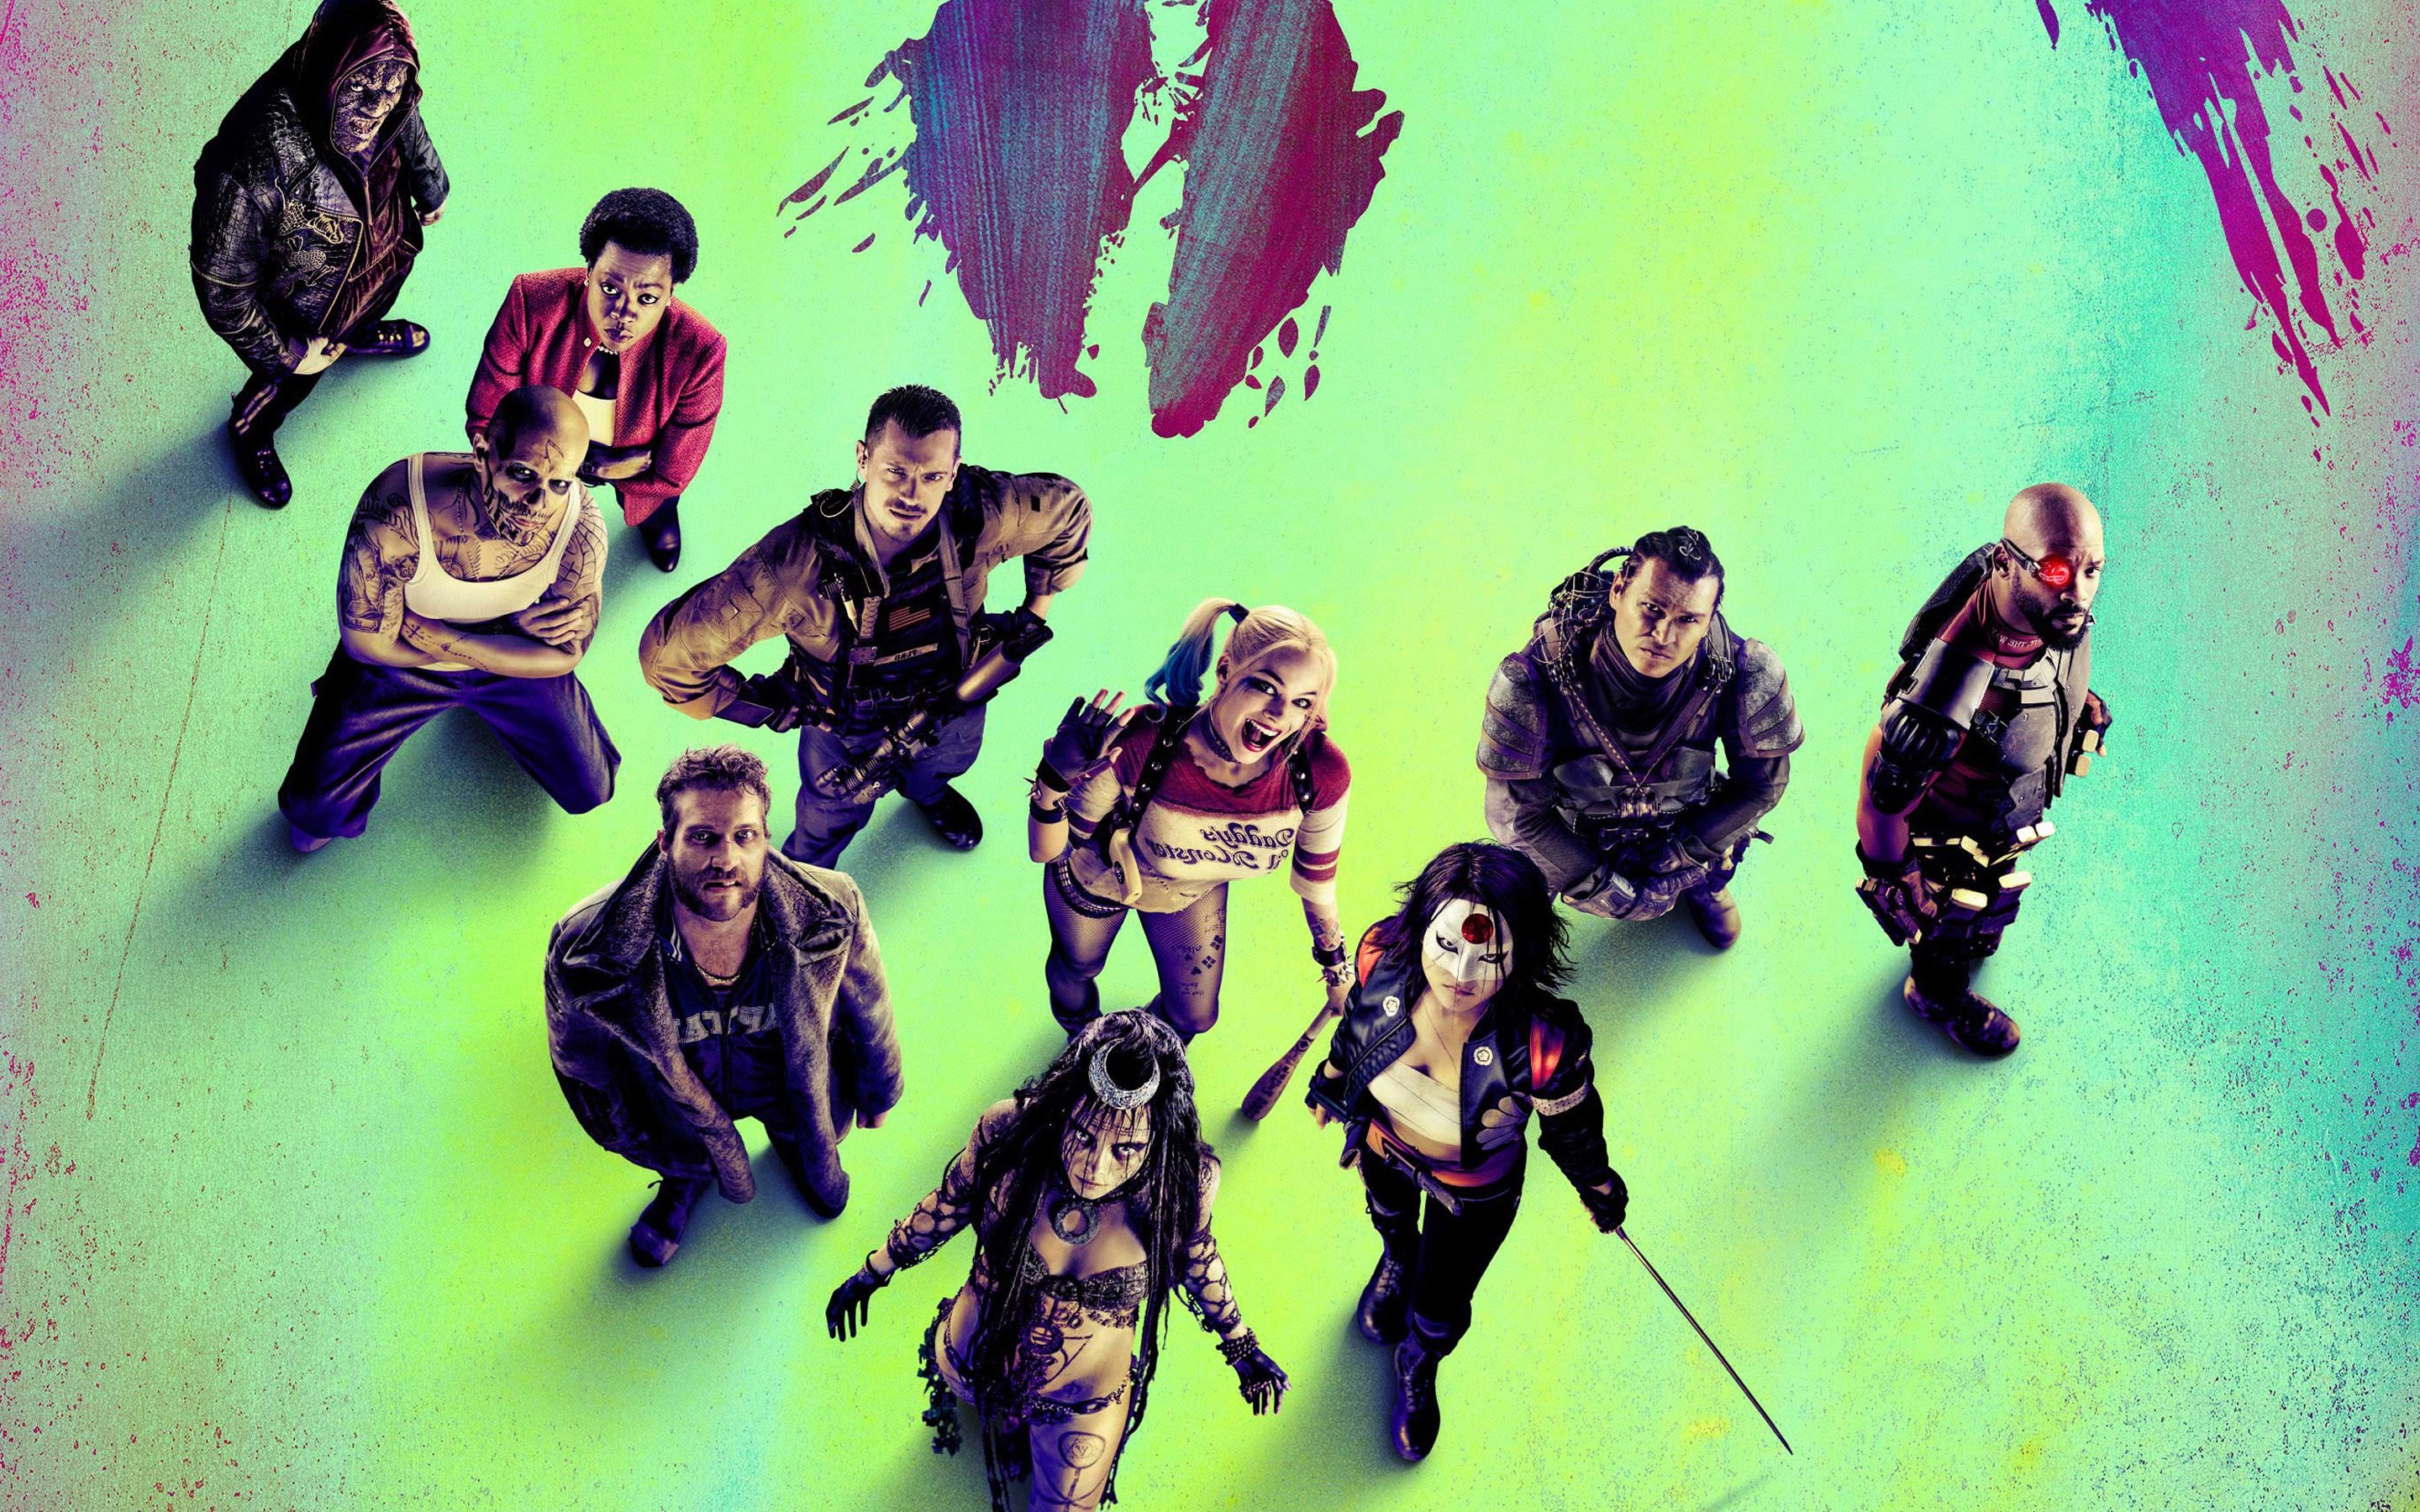 2880x1800 ... Widescreen Wallpapers Â· New Fine Suicide Squad Full HD Photos ...